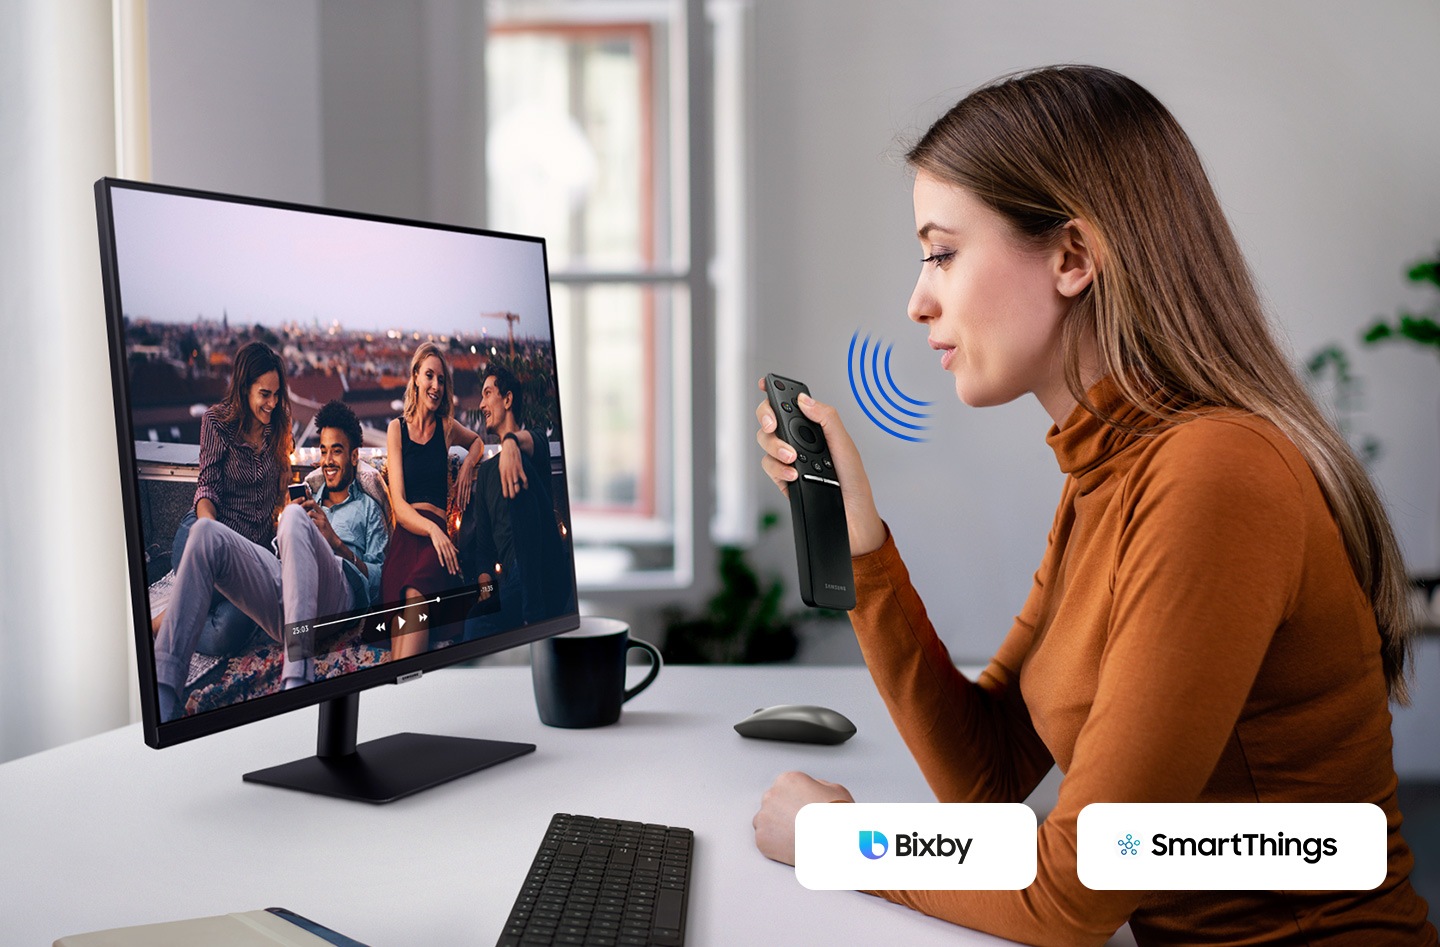 A woman speaks to the monitor. And a video is played on it. The Bixby and SmartThings icon is in the right corner.